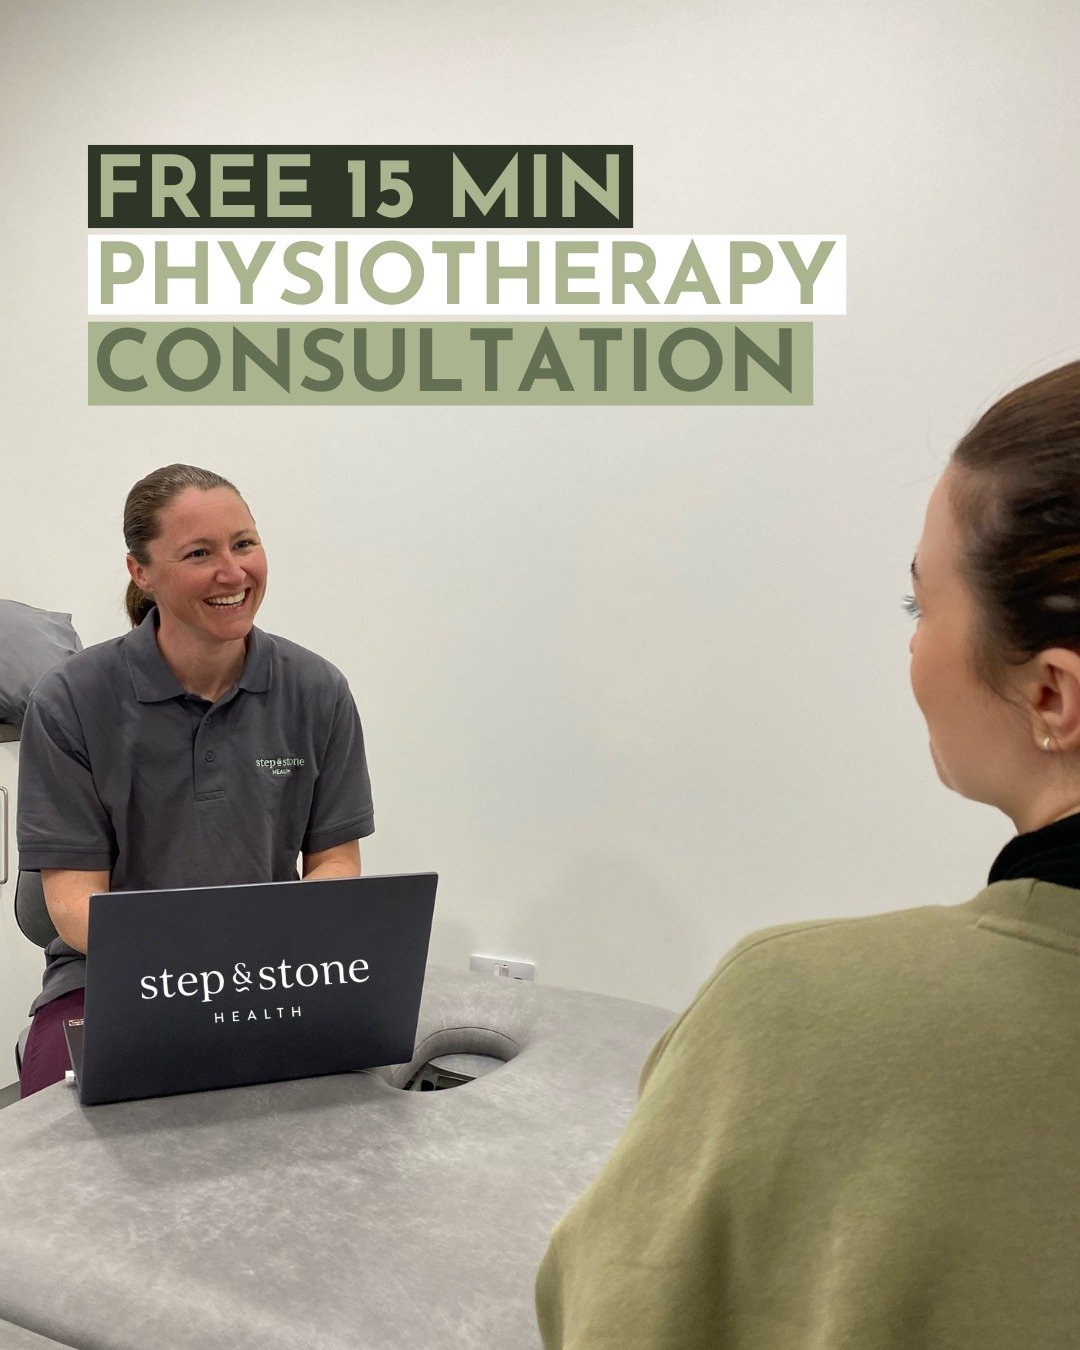 Not sure if you need physiotherapy? We&rsquo;ve got you covered. Our free 15 minute consultations with Imke are great if you want to speak to a physio before starting on a treatment plan. 
She will establish if physiotherapy is the right path for you